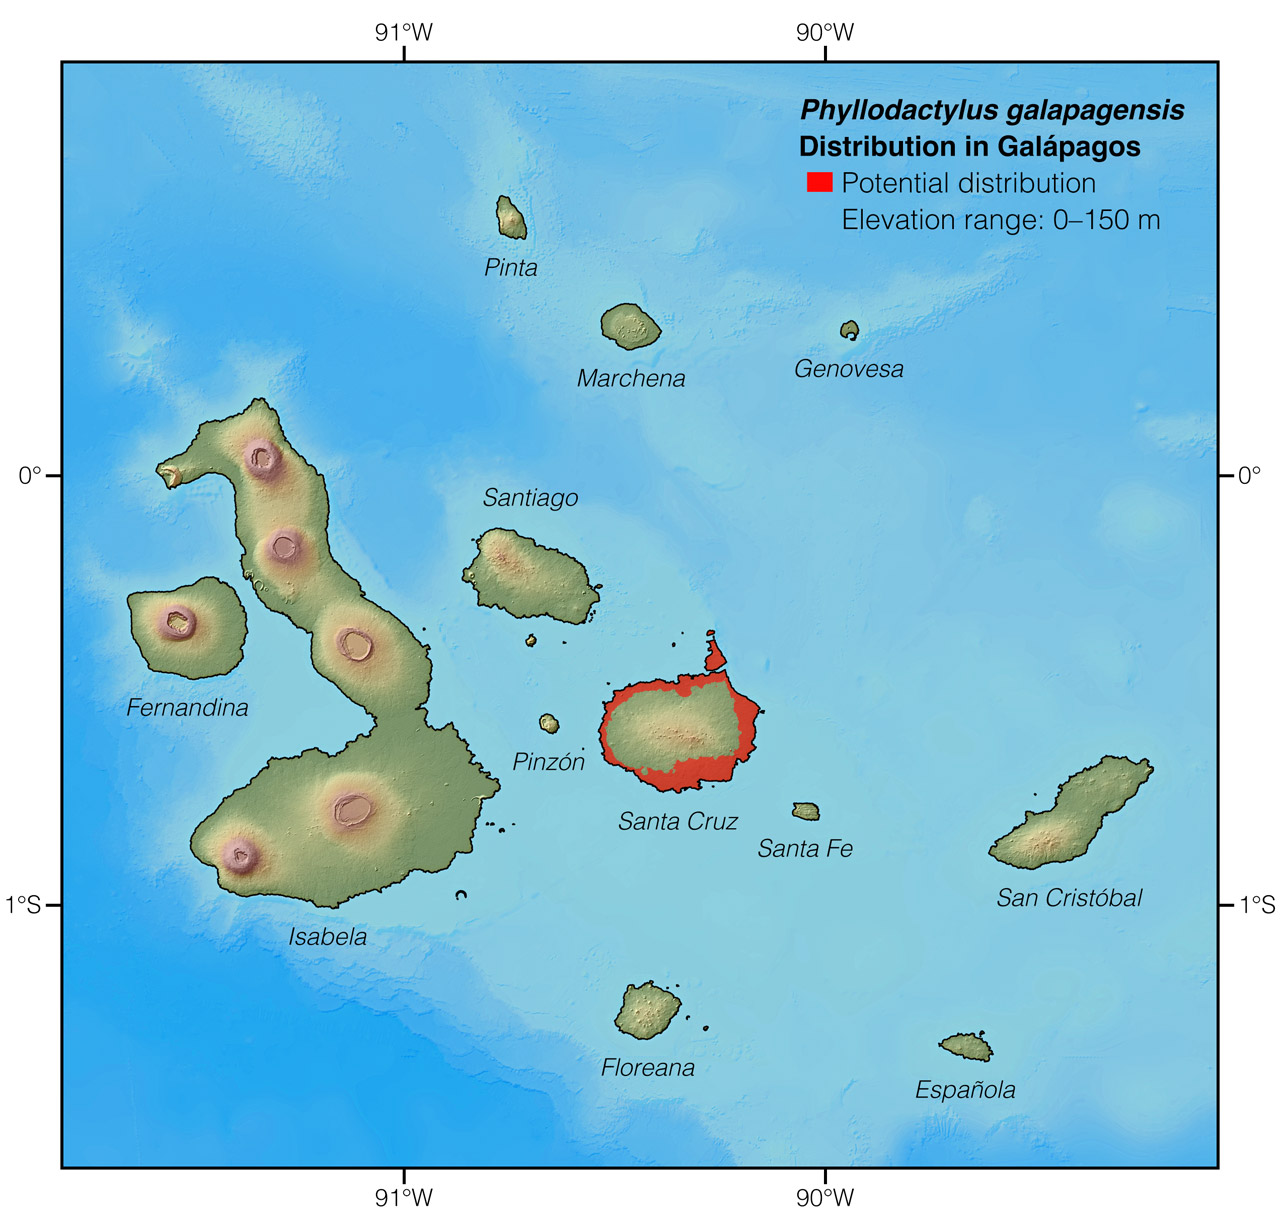 Distribution of Phyllodactylus galapagensis in Galápagos